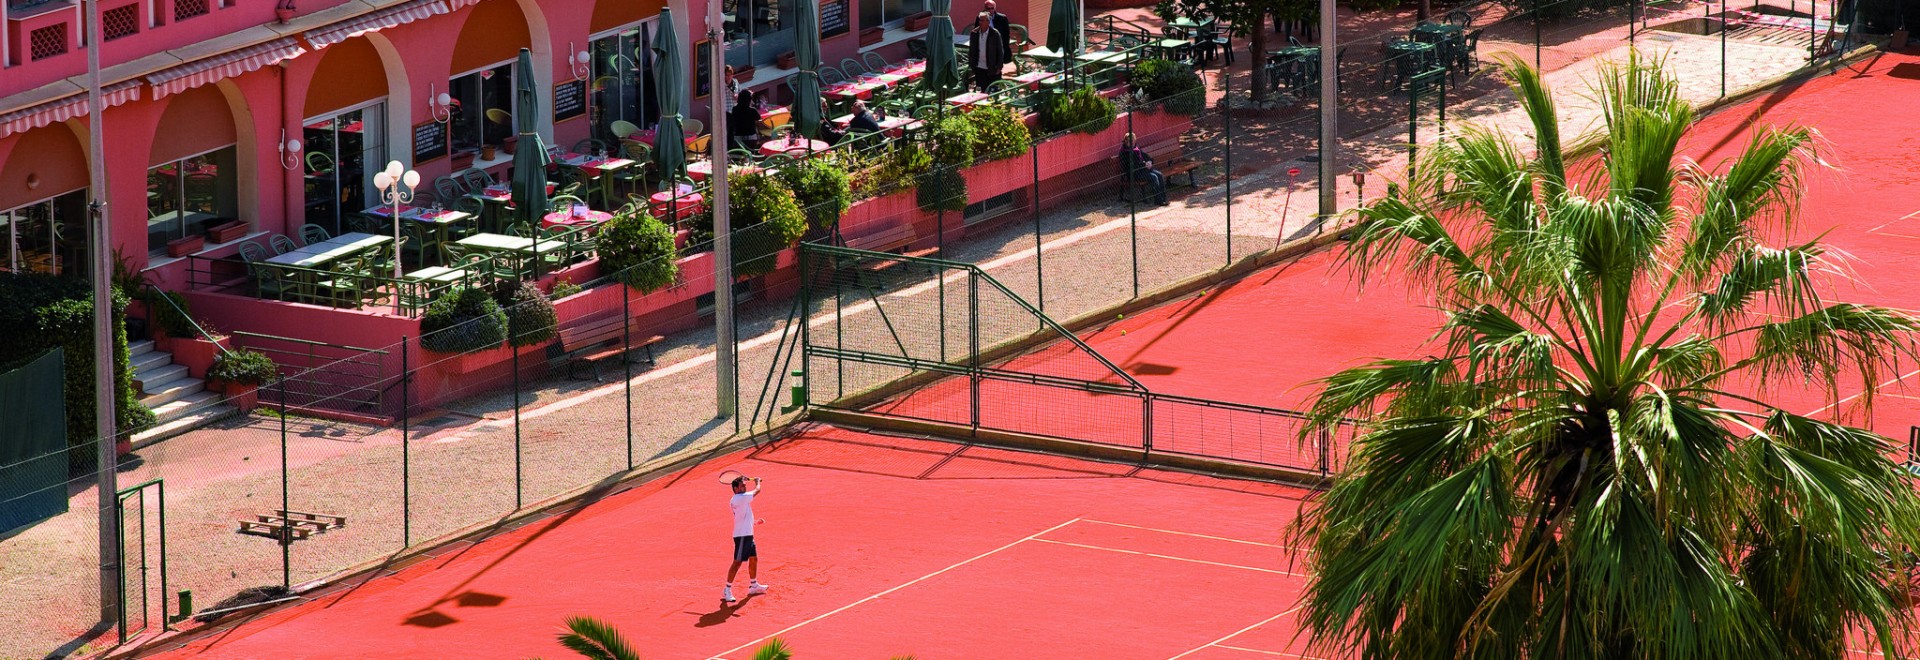 Full-Day Access and 2-Hour Tennis Lesson - Nice Lawn Tennis Club, Nice